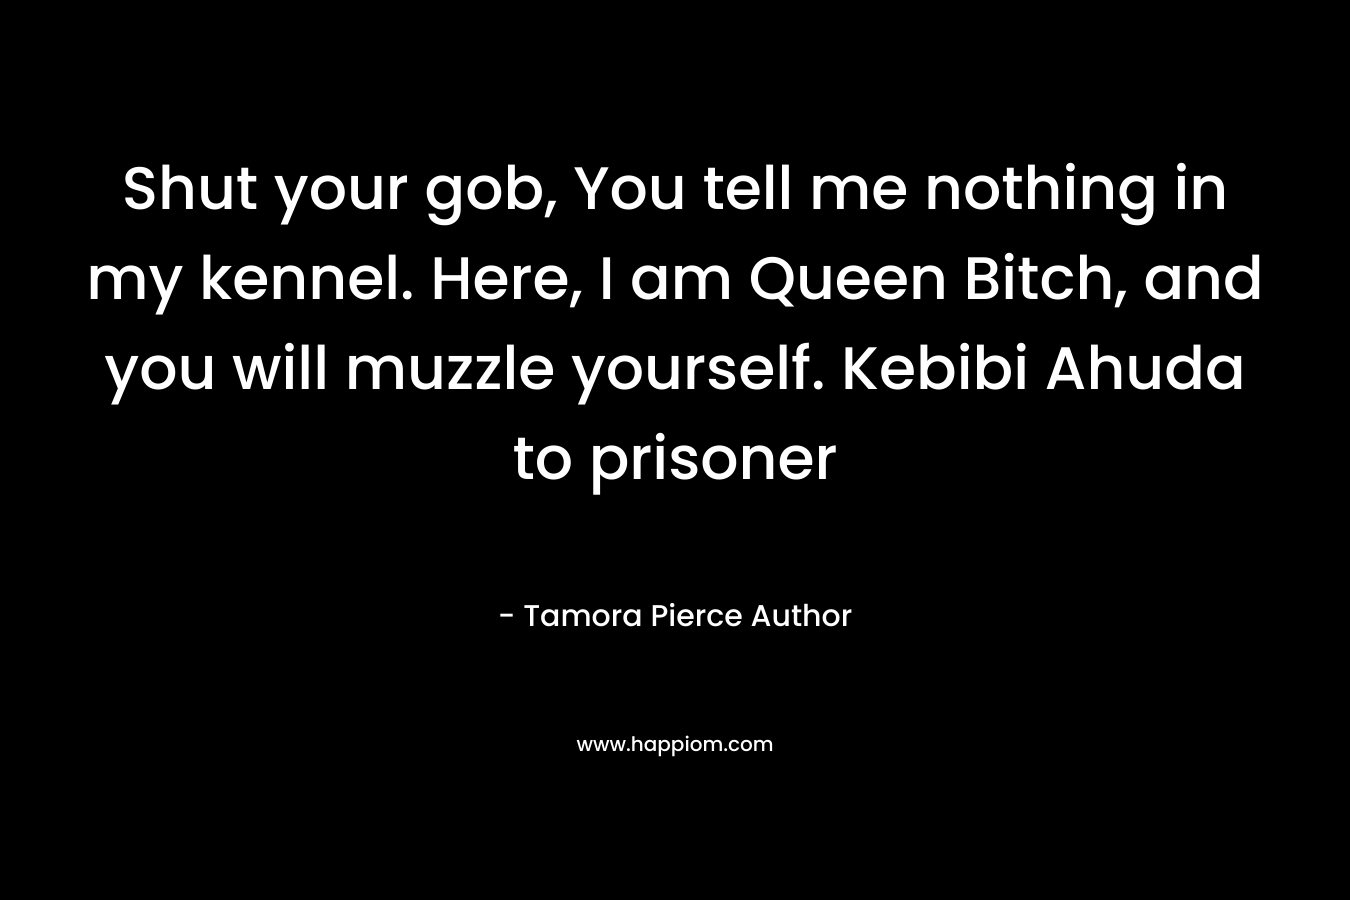 Shut your gob, You tell me nothing in my kennel. Here, I am Queen Bitch, and you will muzzle yourself. Kebibi Ahuda to prisoner – Tamora Pierce Author